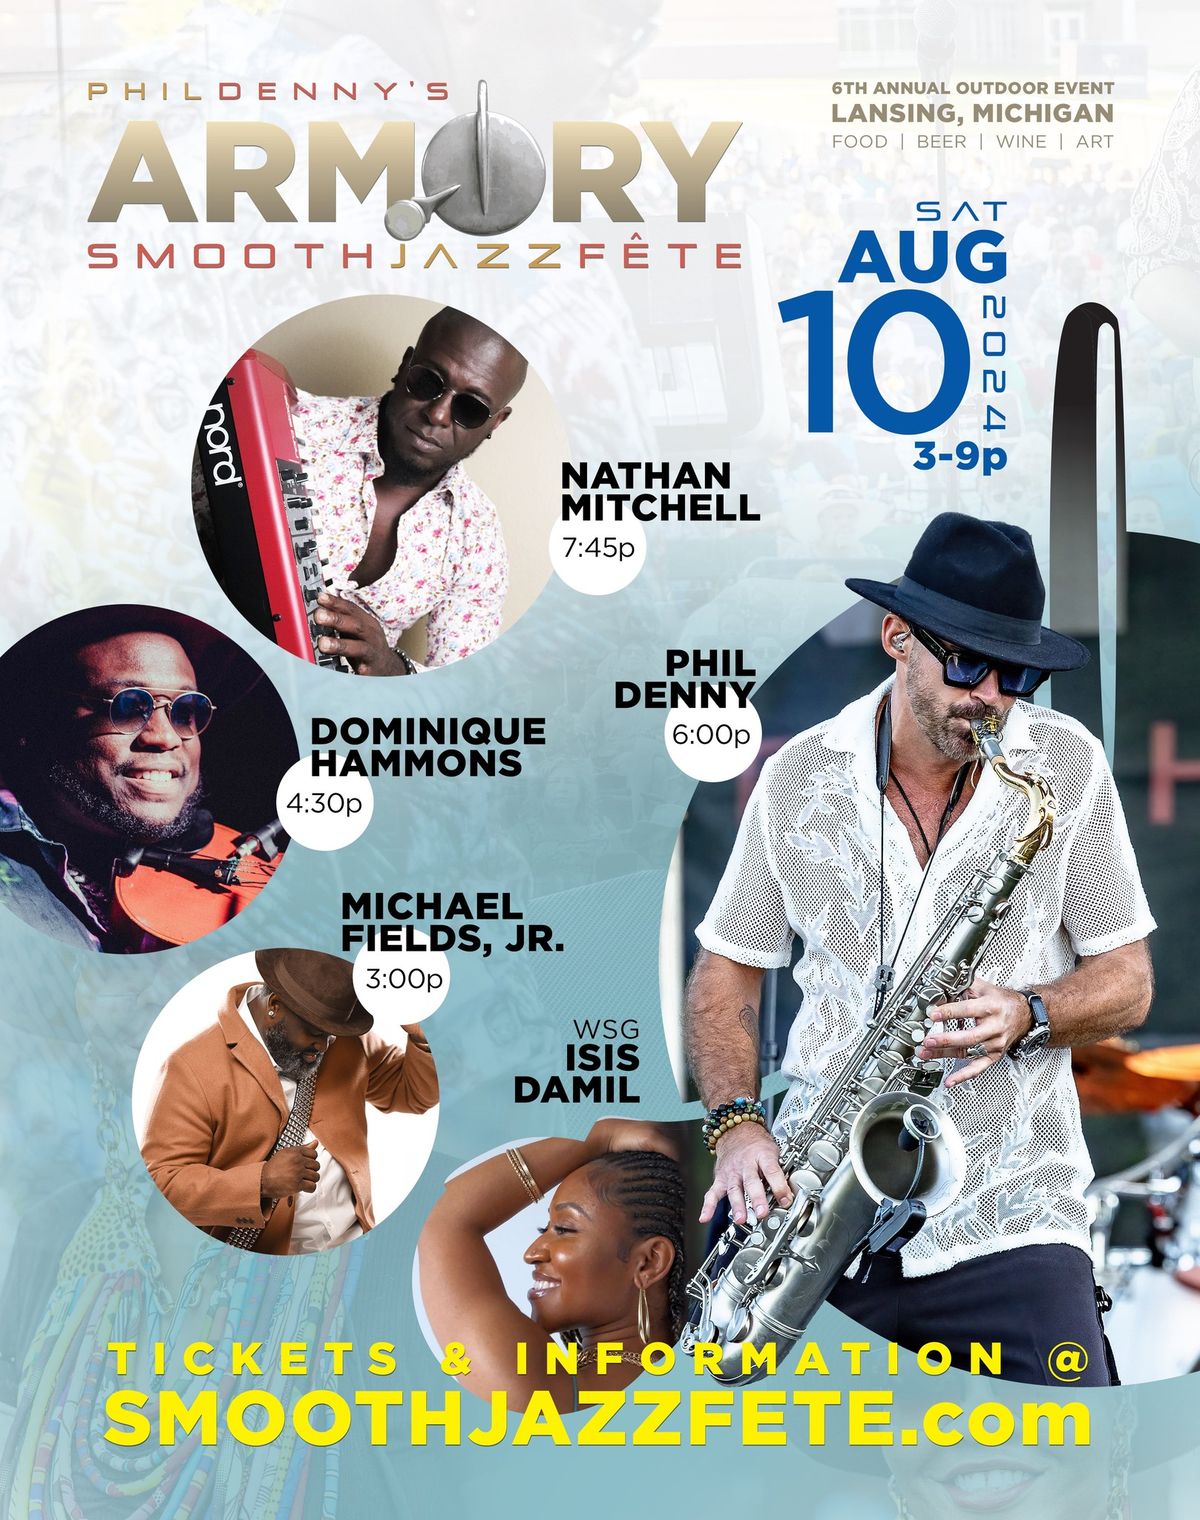 6th Annual Phil Denny's Armory Smooth Jazz Fete